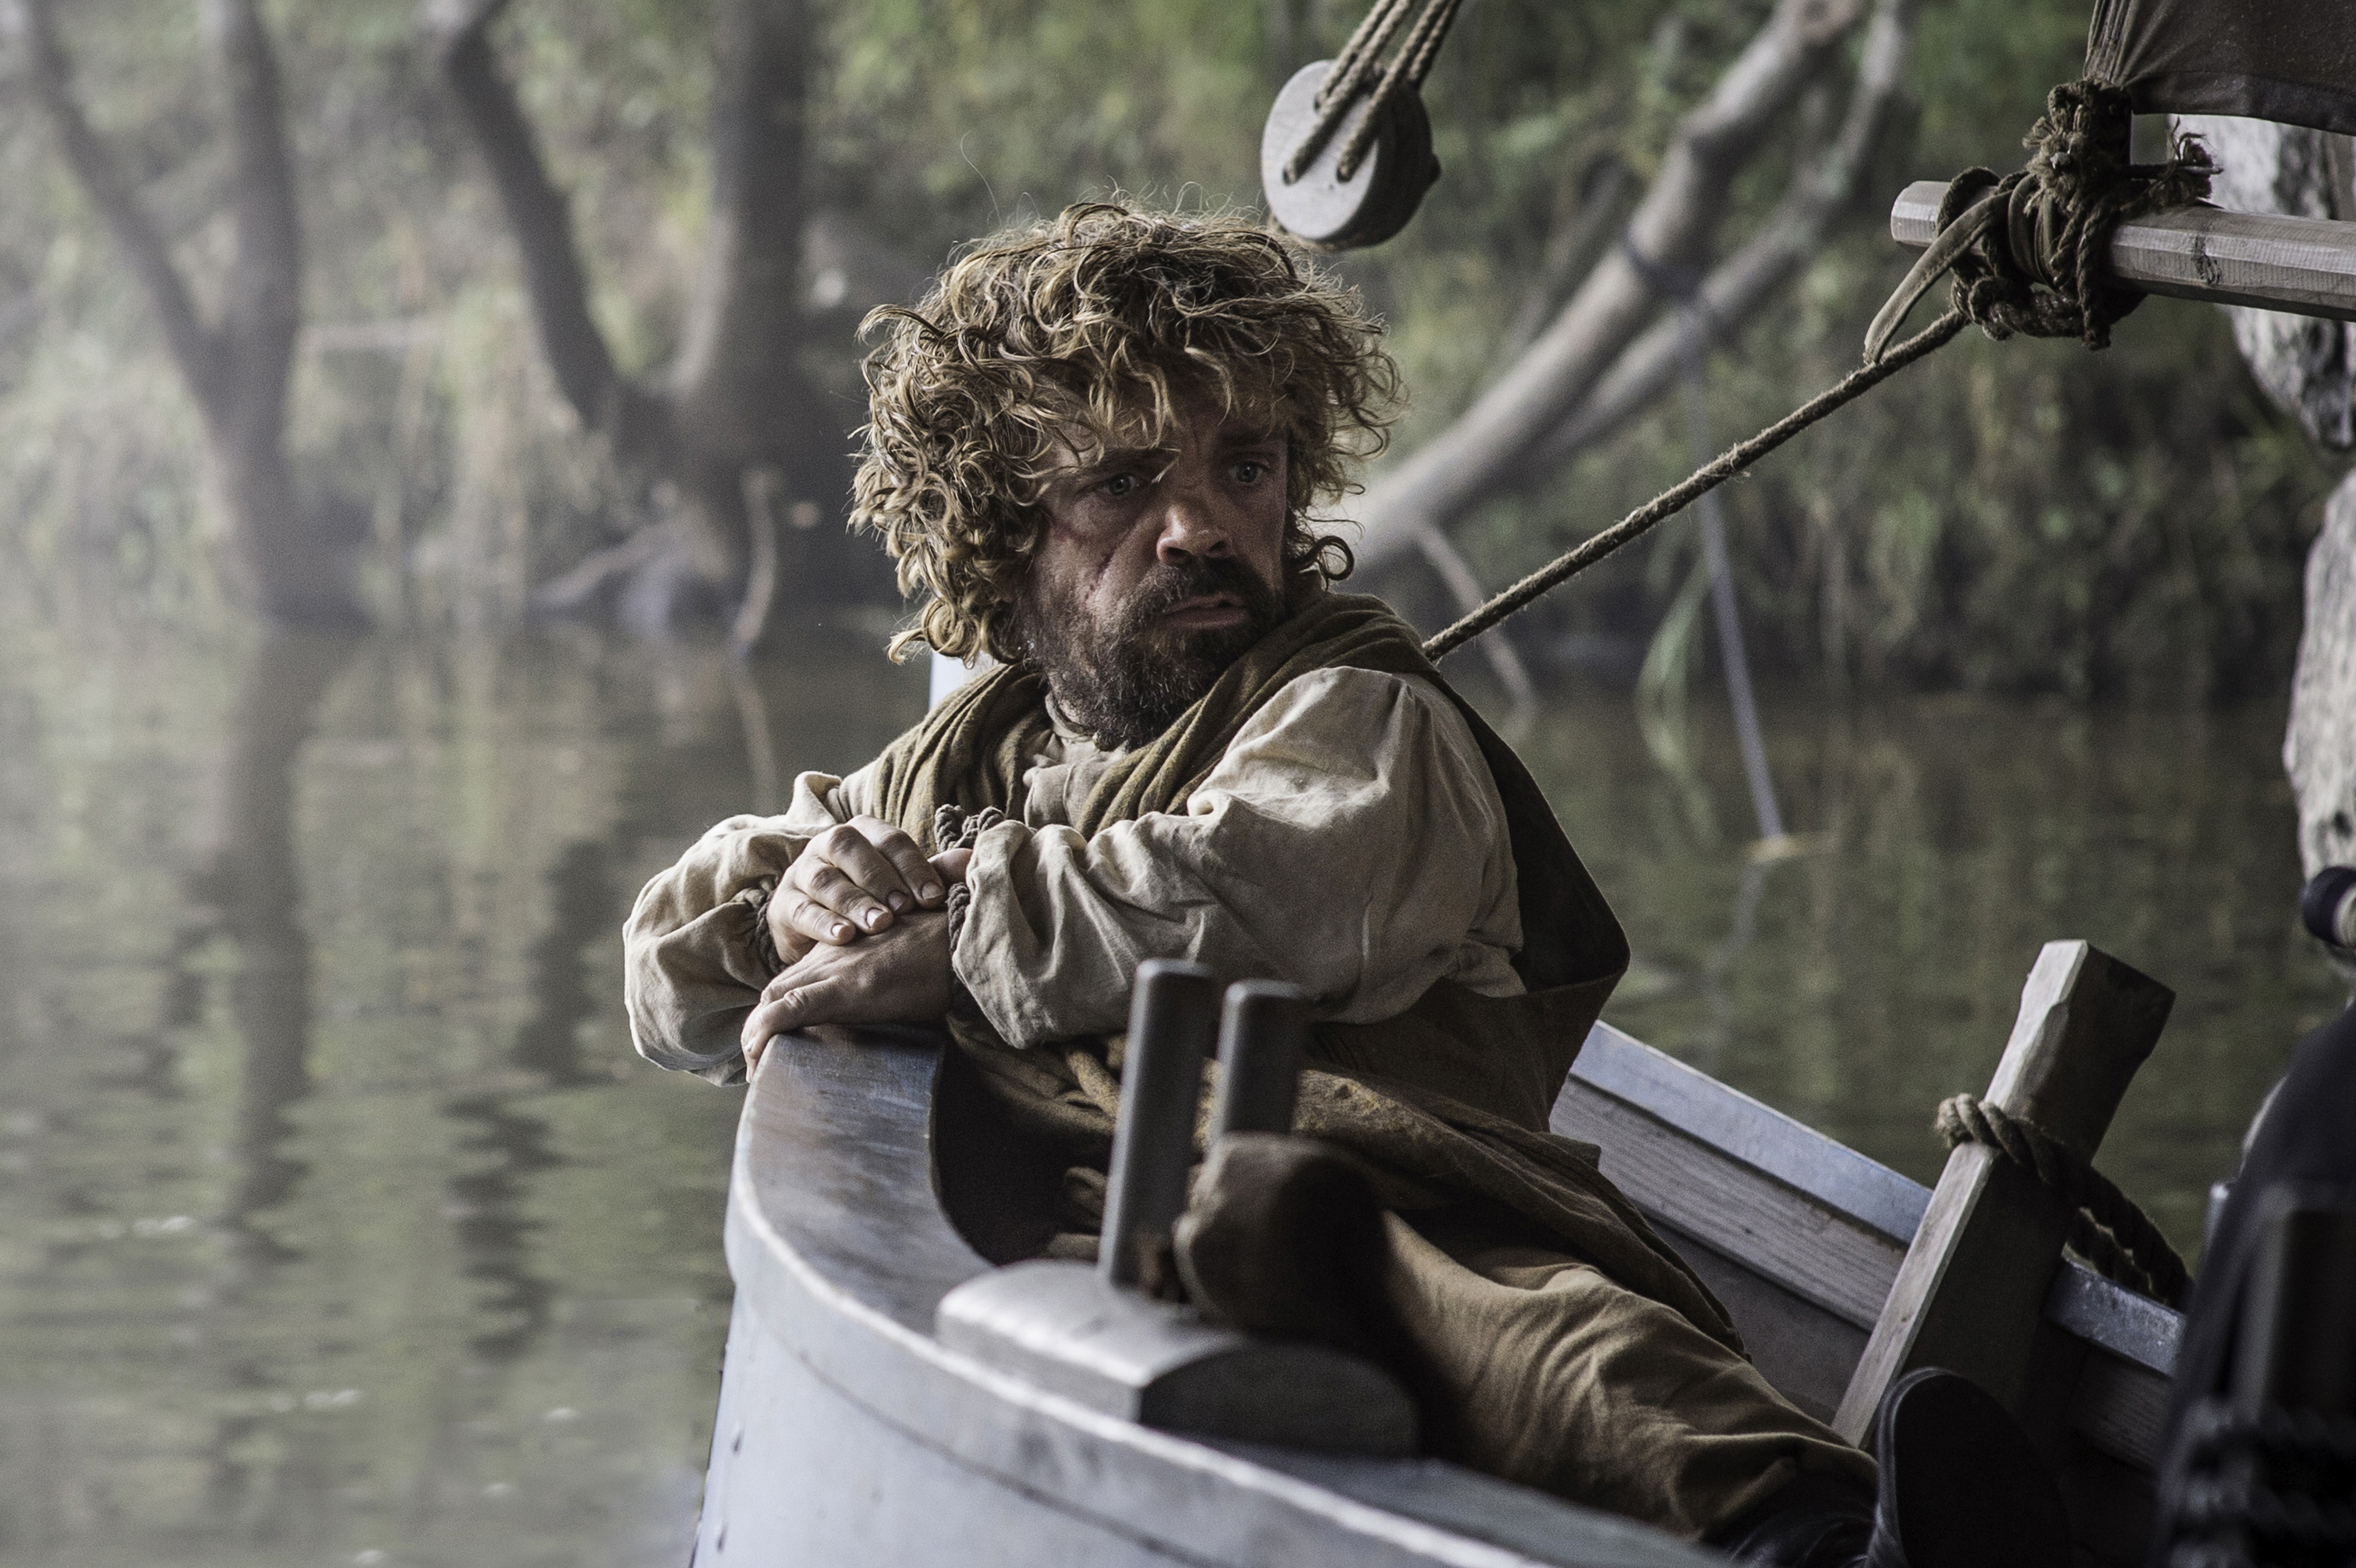 Tyrion (Peter Dinklage) in "Kill the Boy"